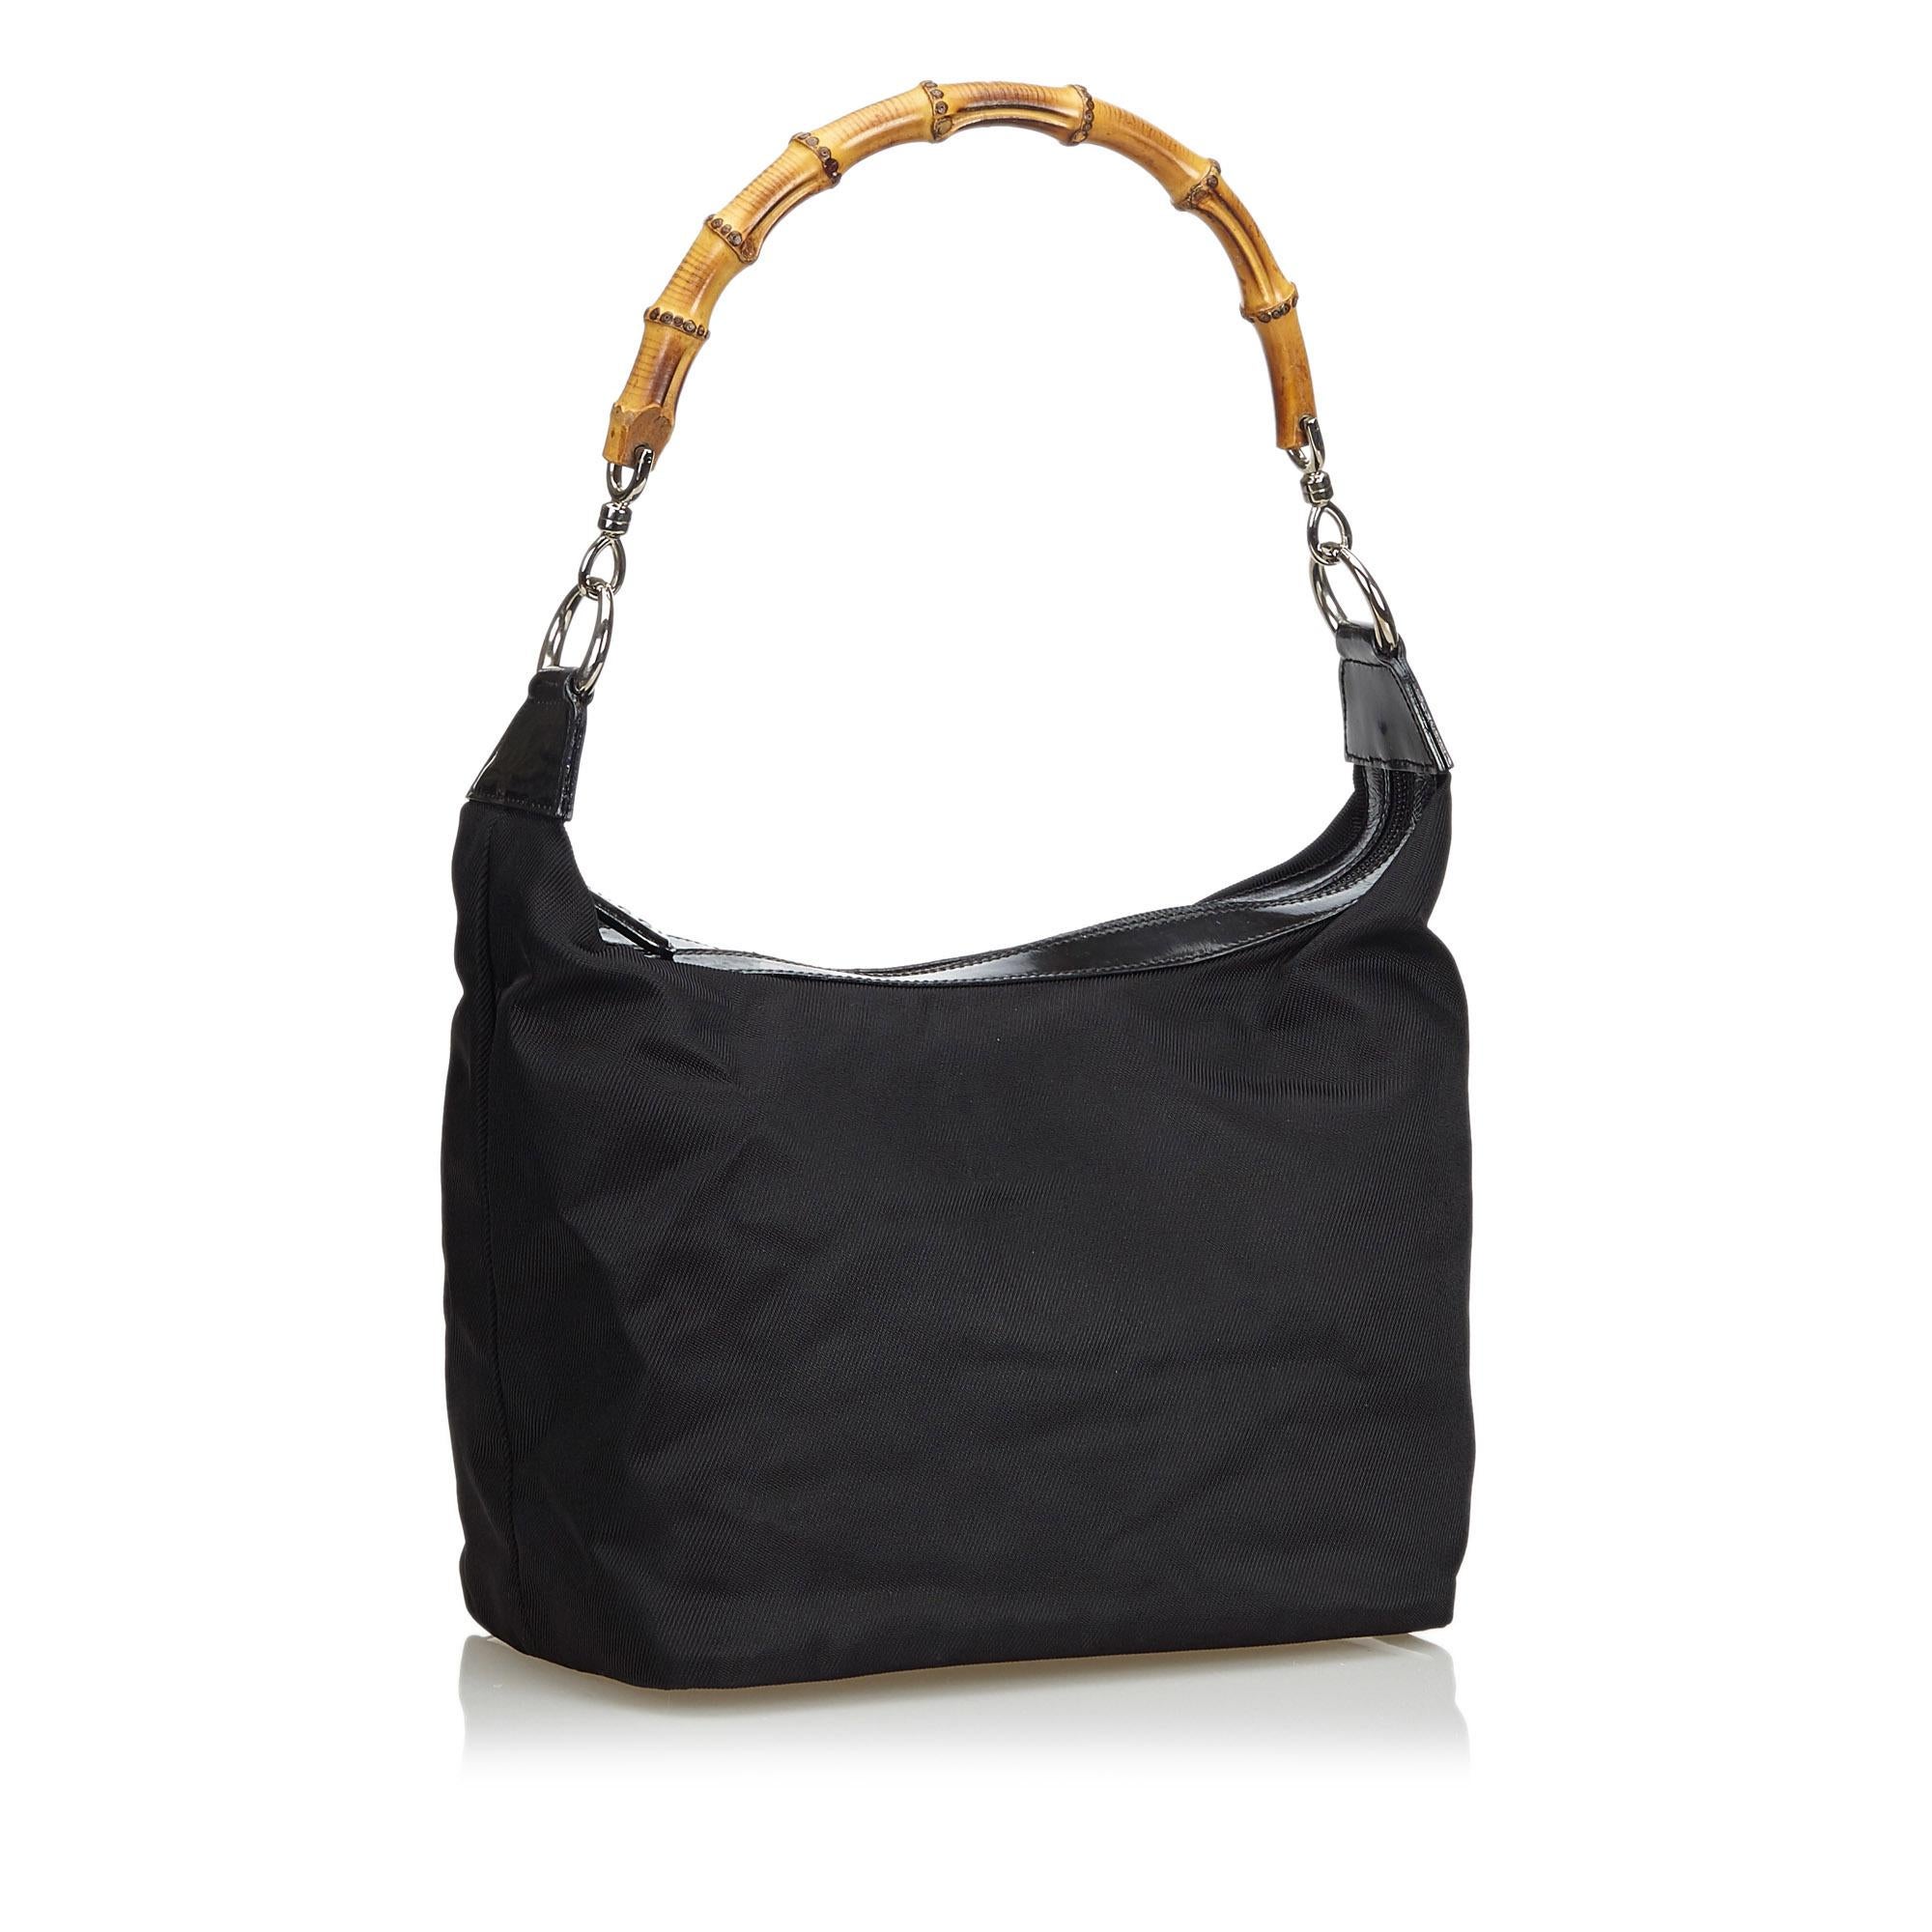 This handbag features a nylon body with leather trim, a bamboo handle, a top zip closure and an interior zip pocket. It carries as B+ condition rating.

Inclusions: 
This item does not come with inclusions.

Dimensions:
Length: 19.00 cm
Width: 36.00